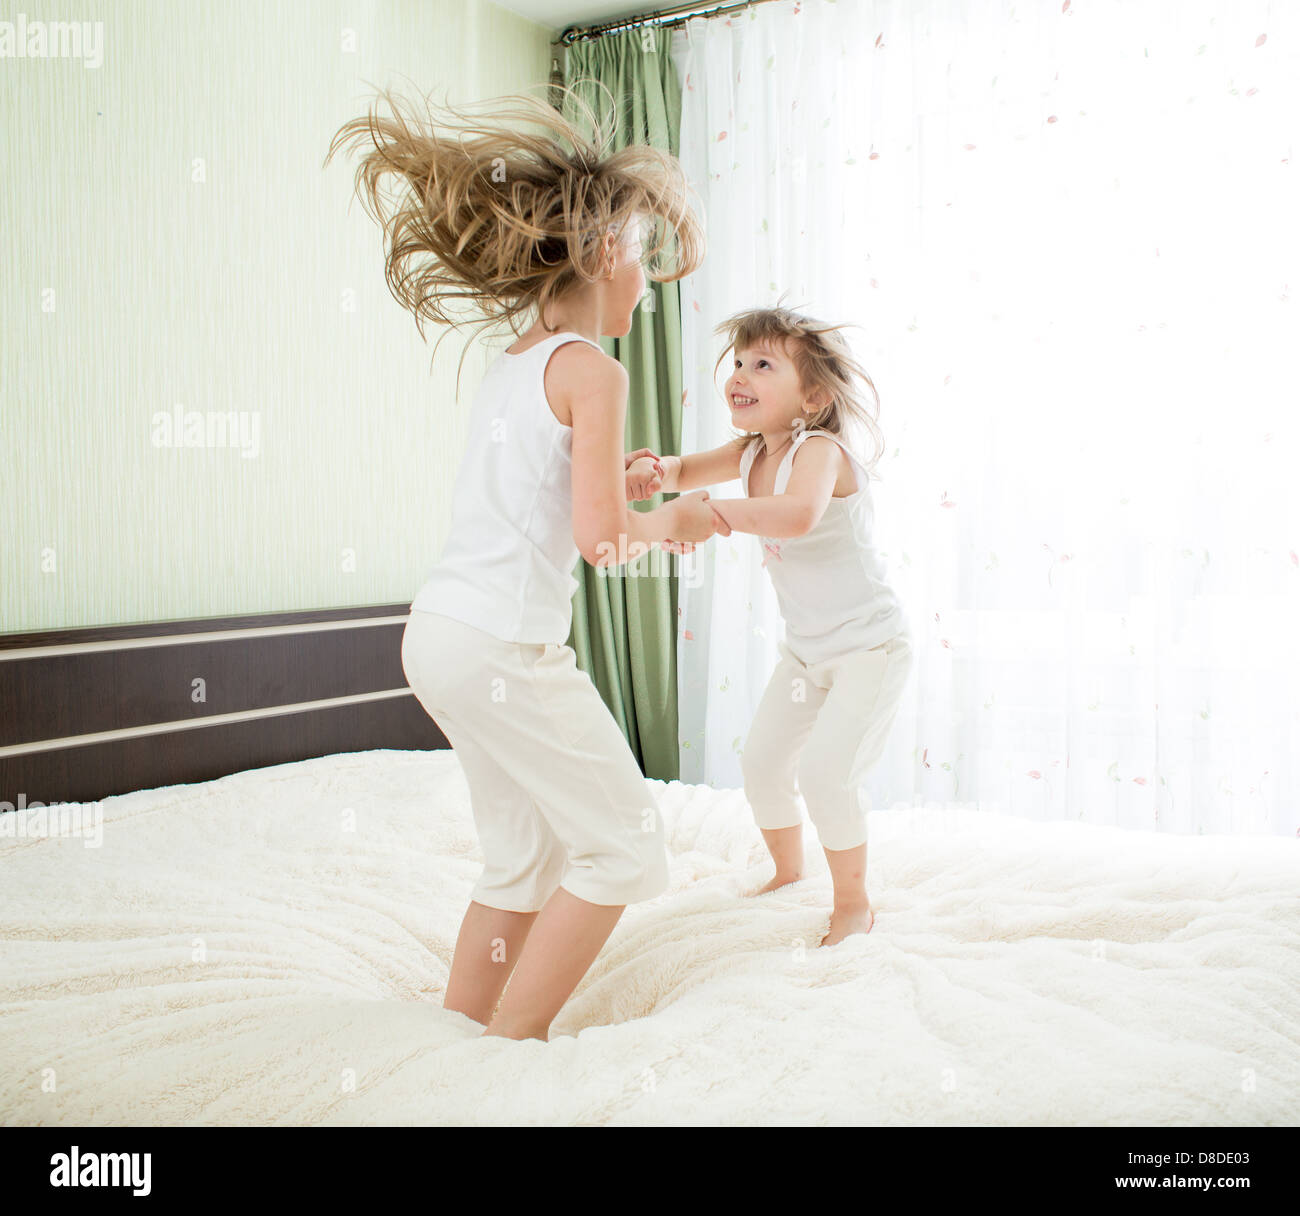 Little girls jumping on bed Stock Photo